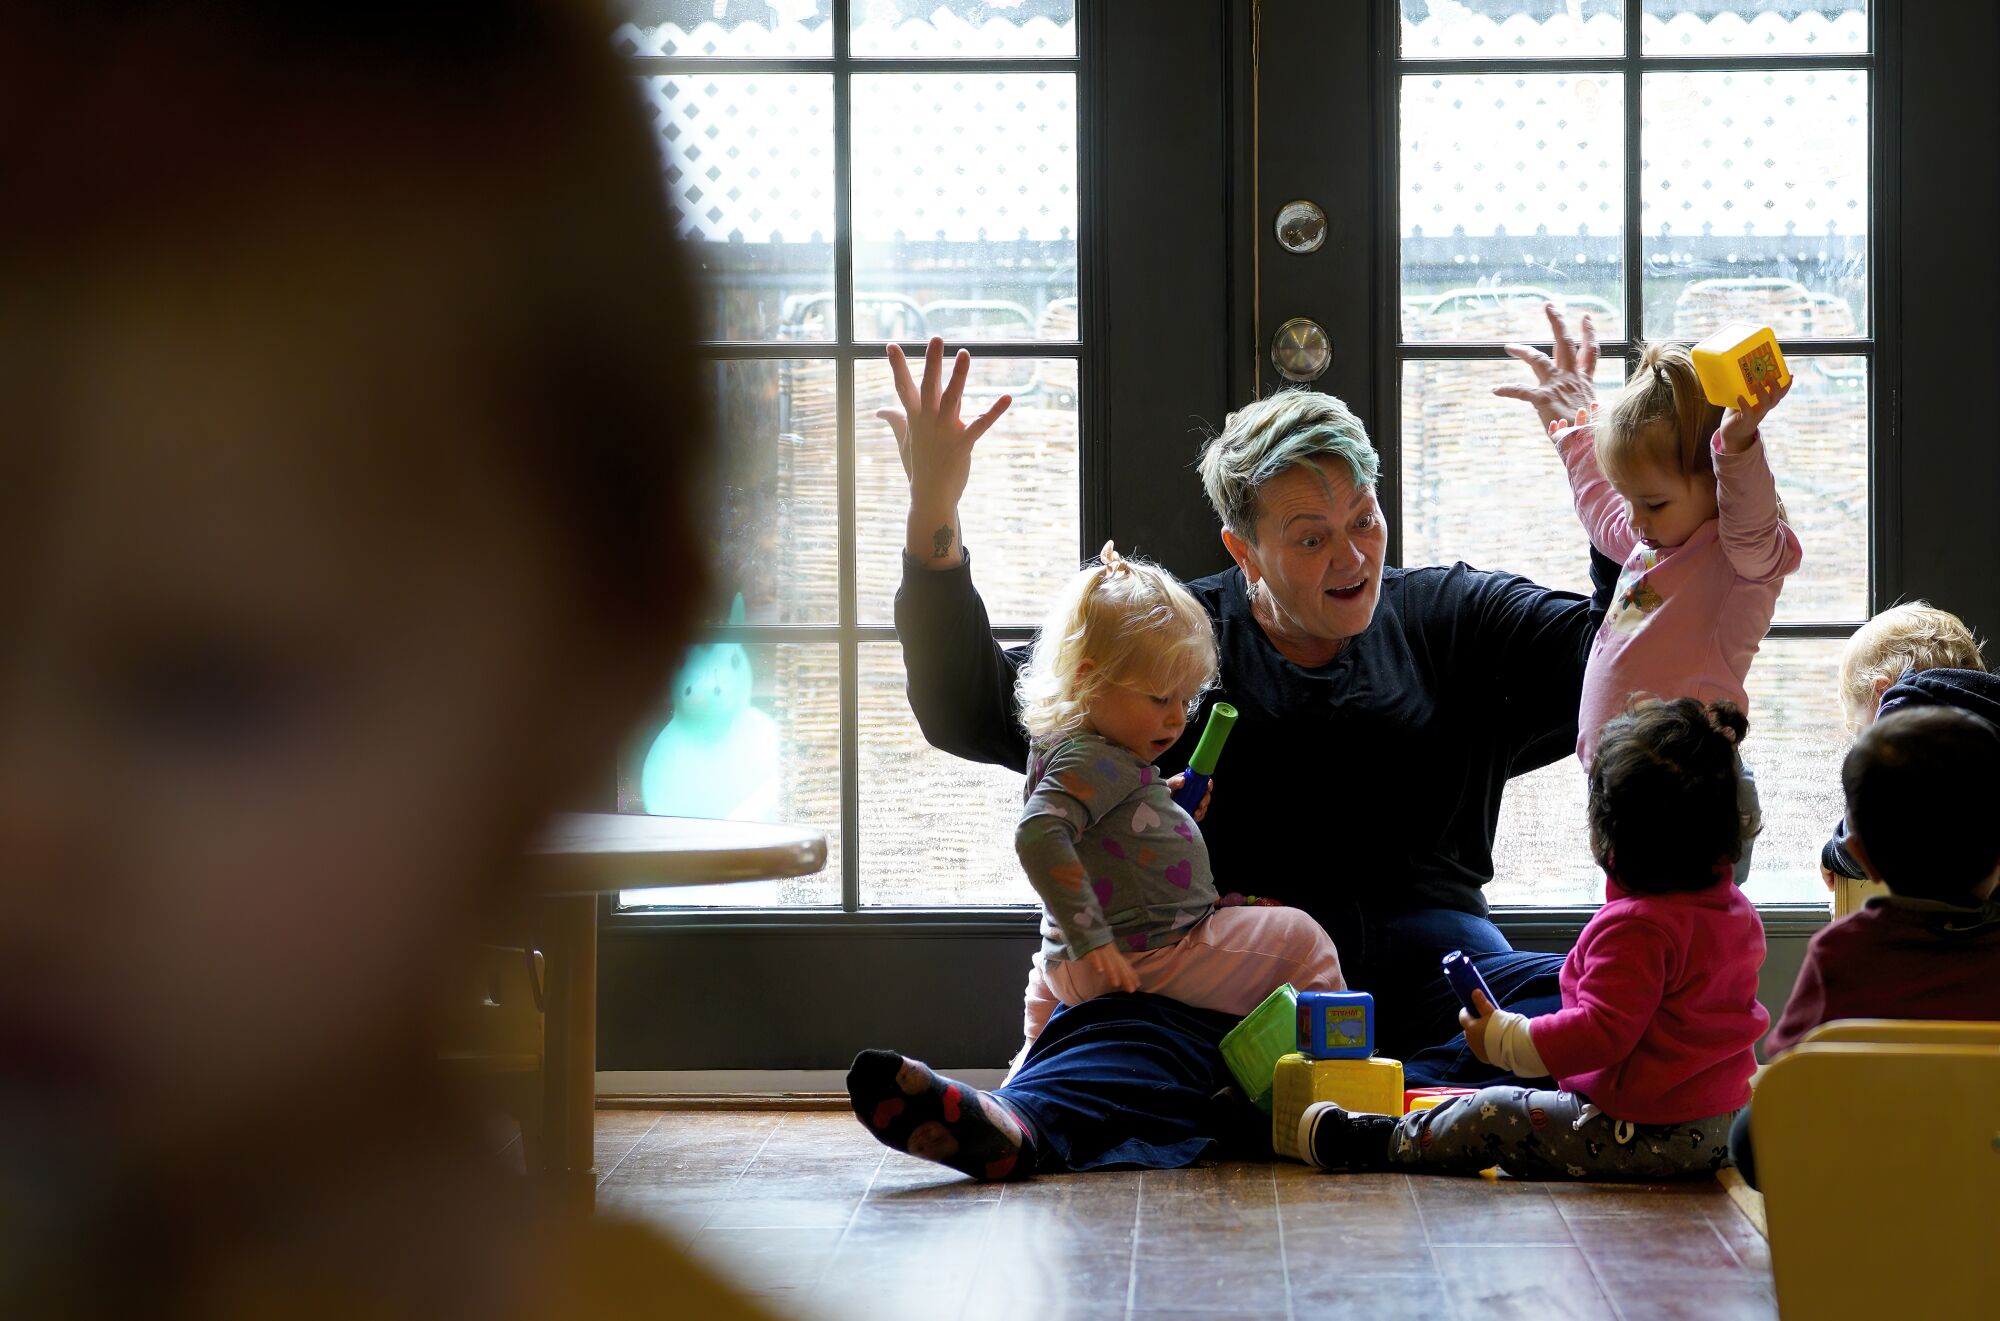 A woman sits on the floor in front of glass doors, gesturing animatedly to four toddlers.